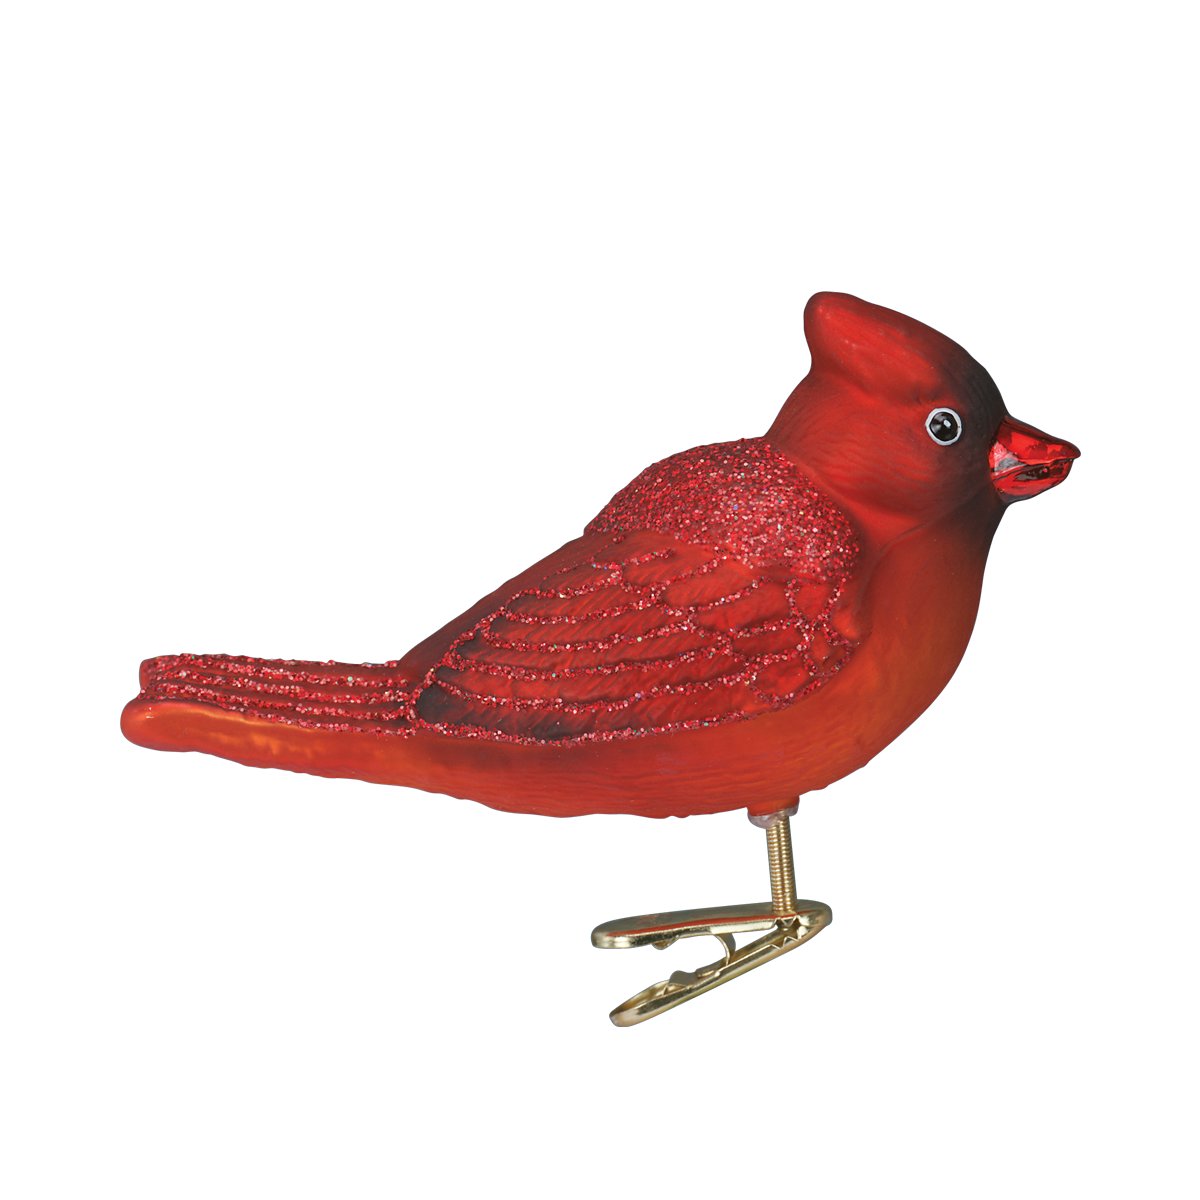 Clip-On Bright Red Cardinal Blown Glass Christmas Ornament by Old World Christmas